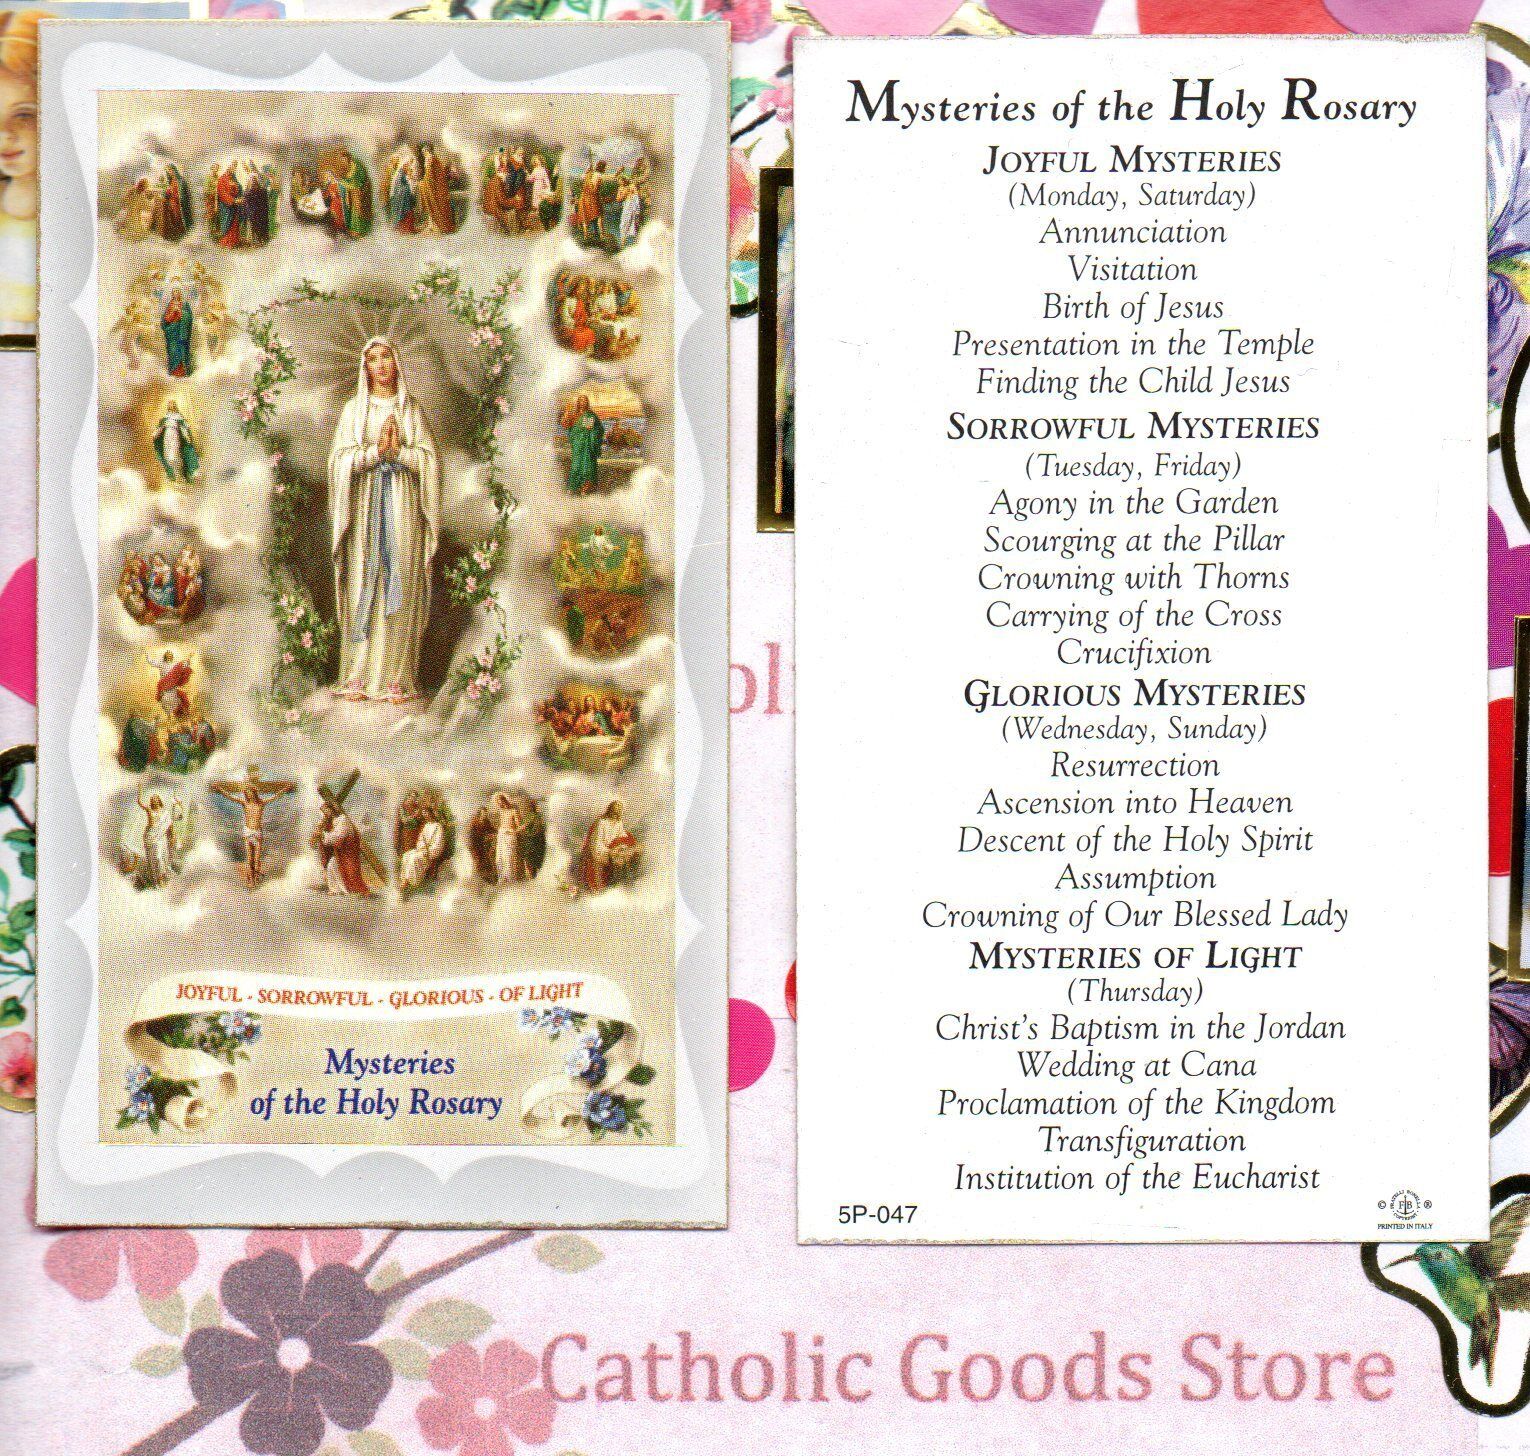 20 Mysteries of the Holy Rosary - Paperstock Holy Card